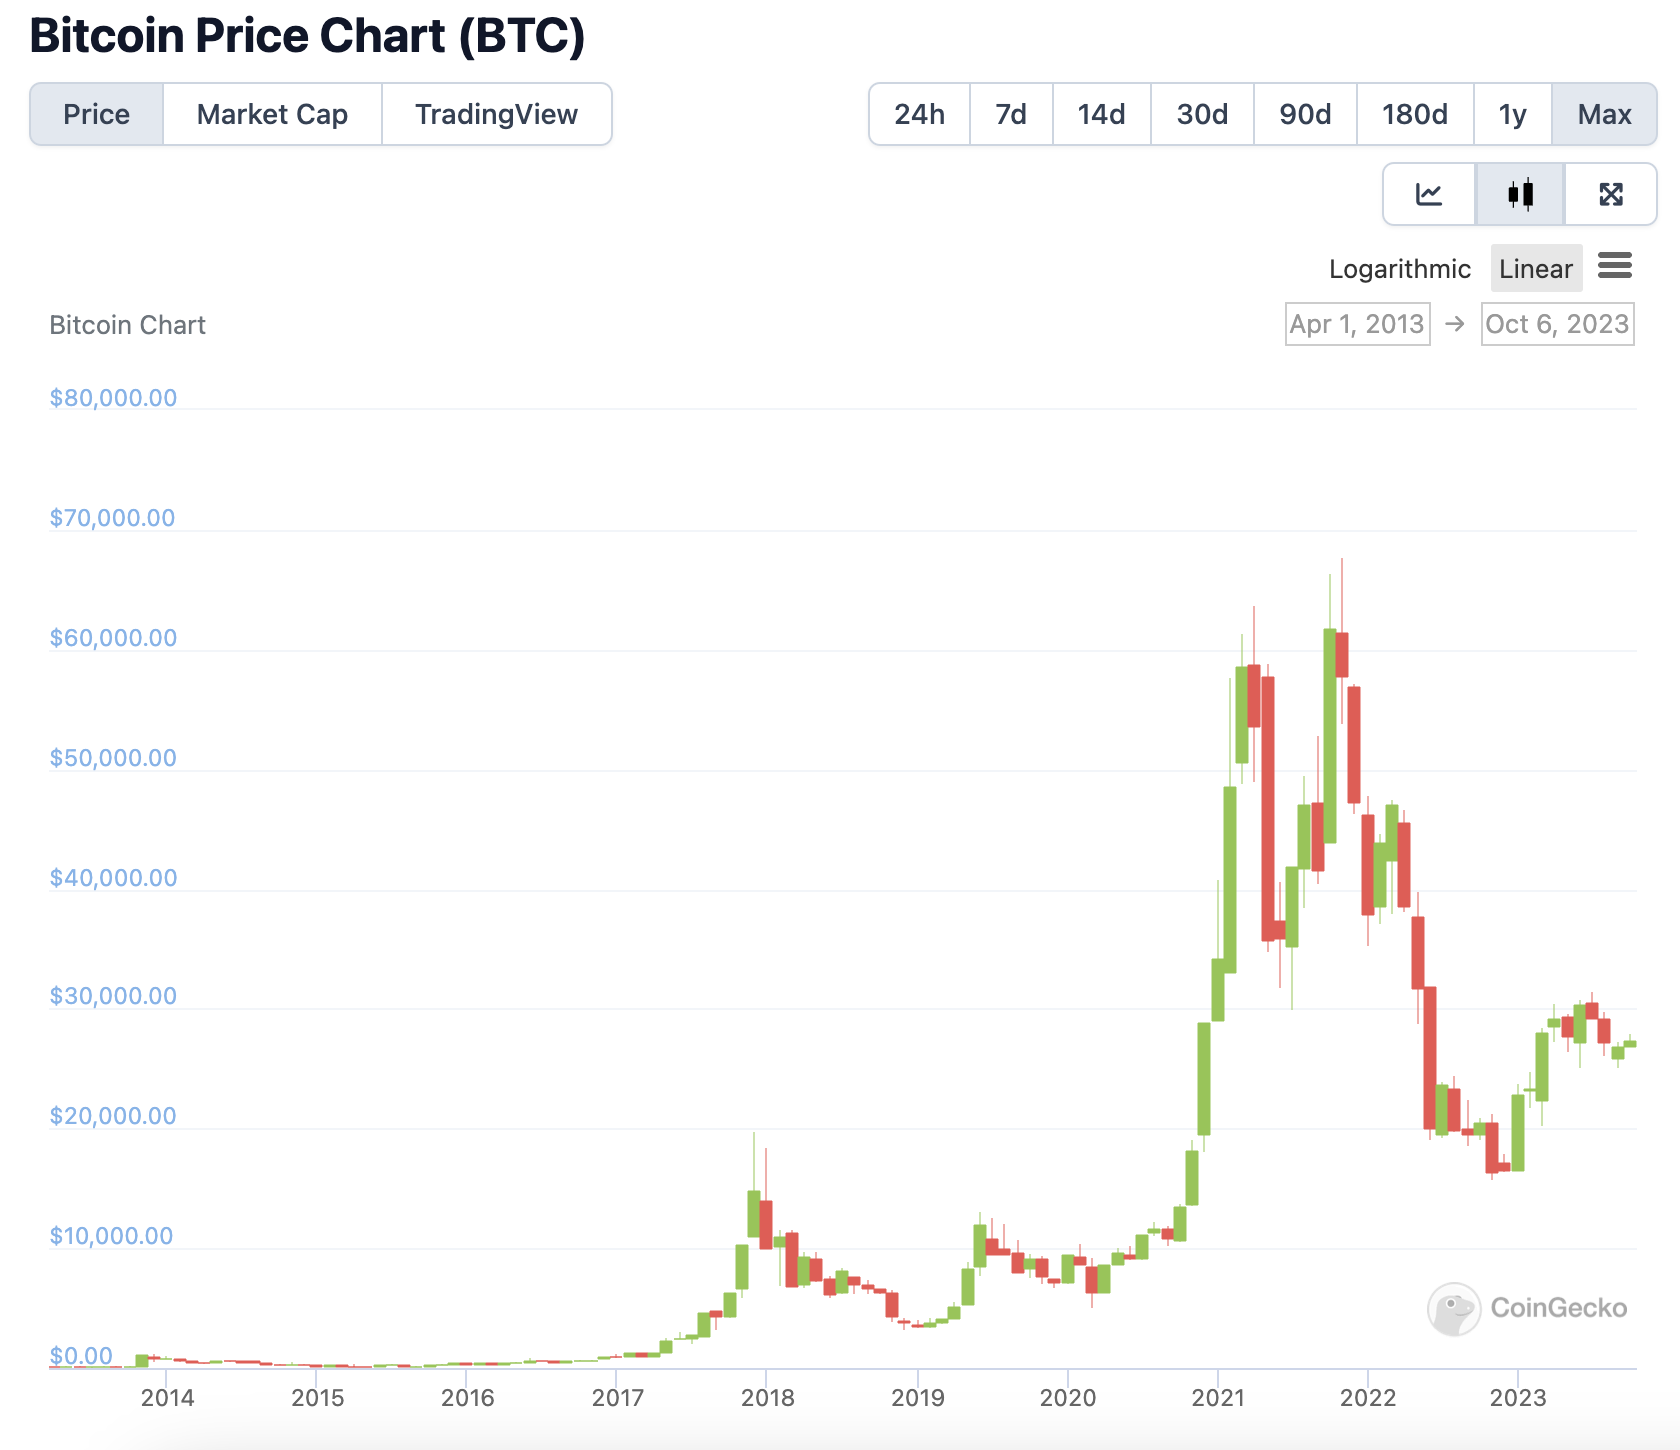 A CoinGecko chart of Bitcoin's price over time between 2009-2023